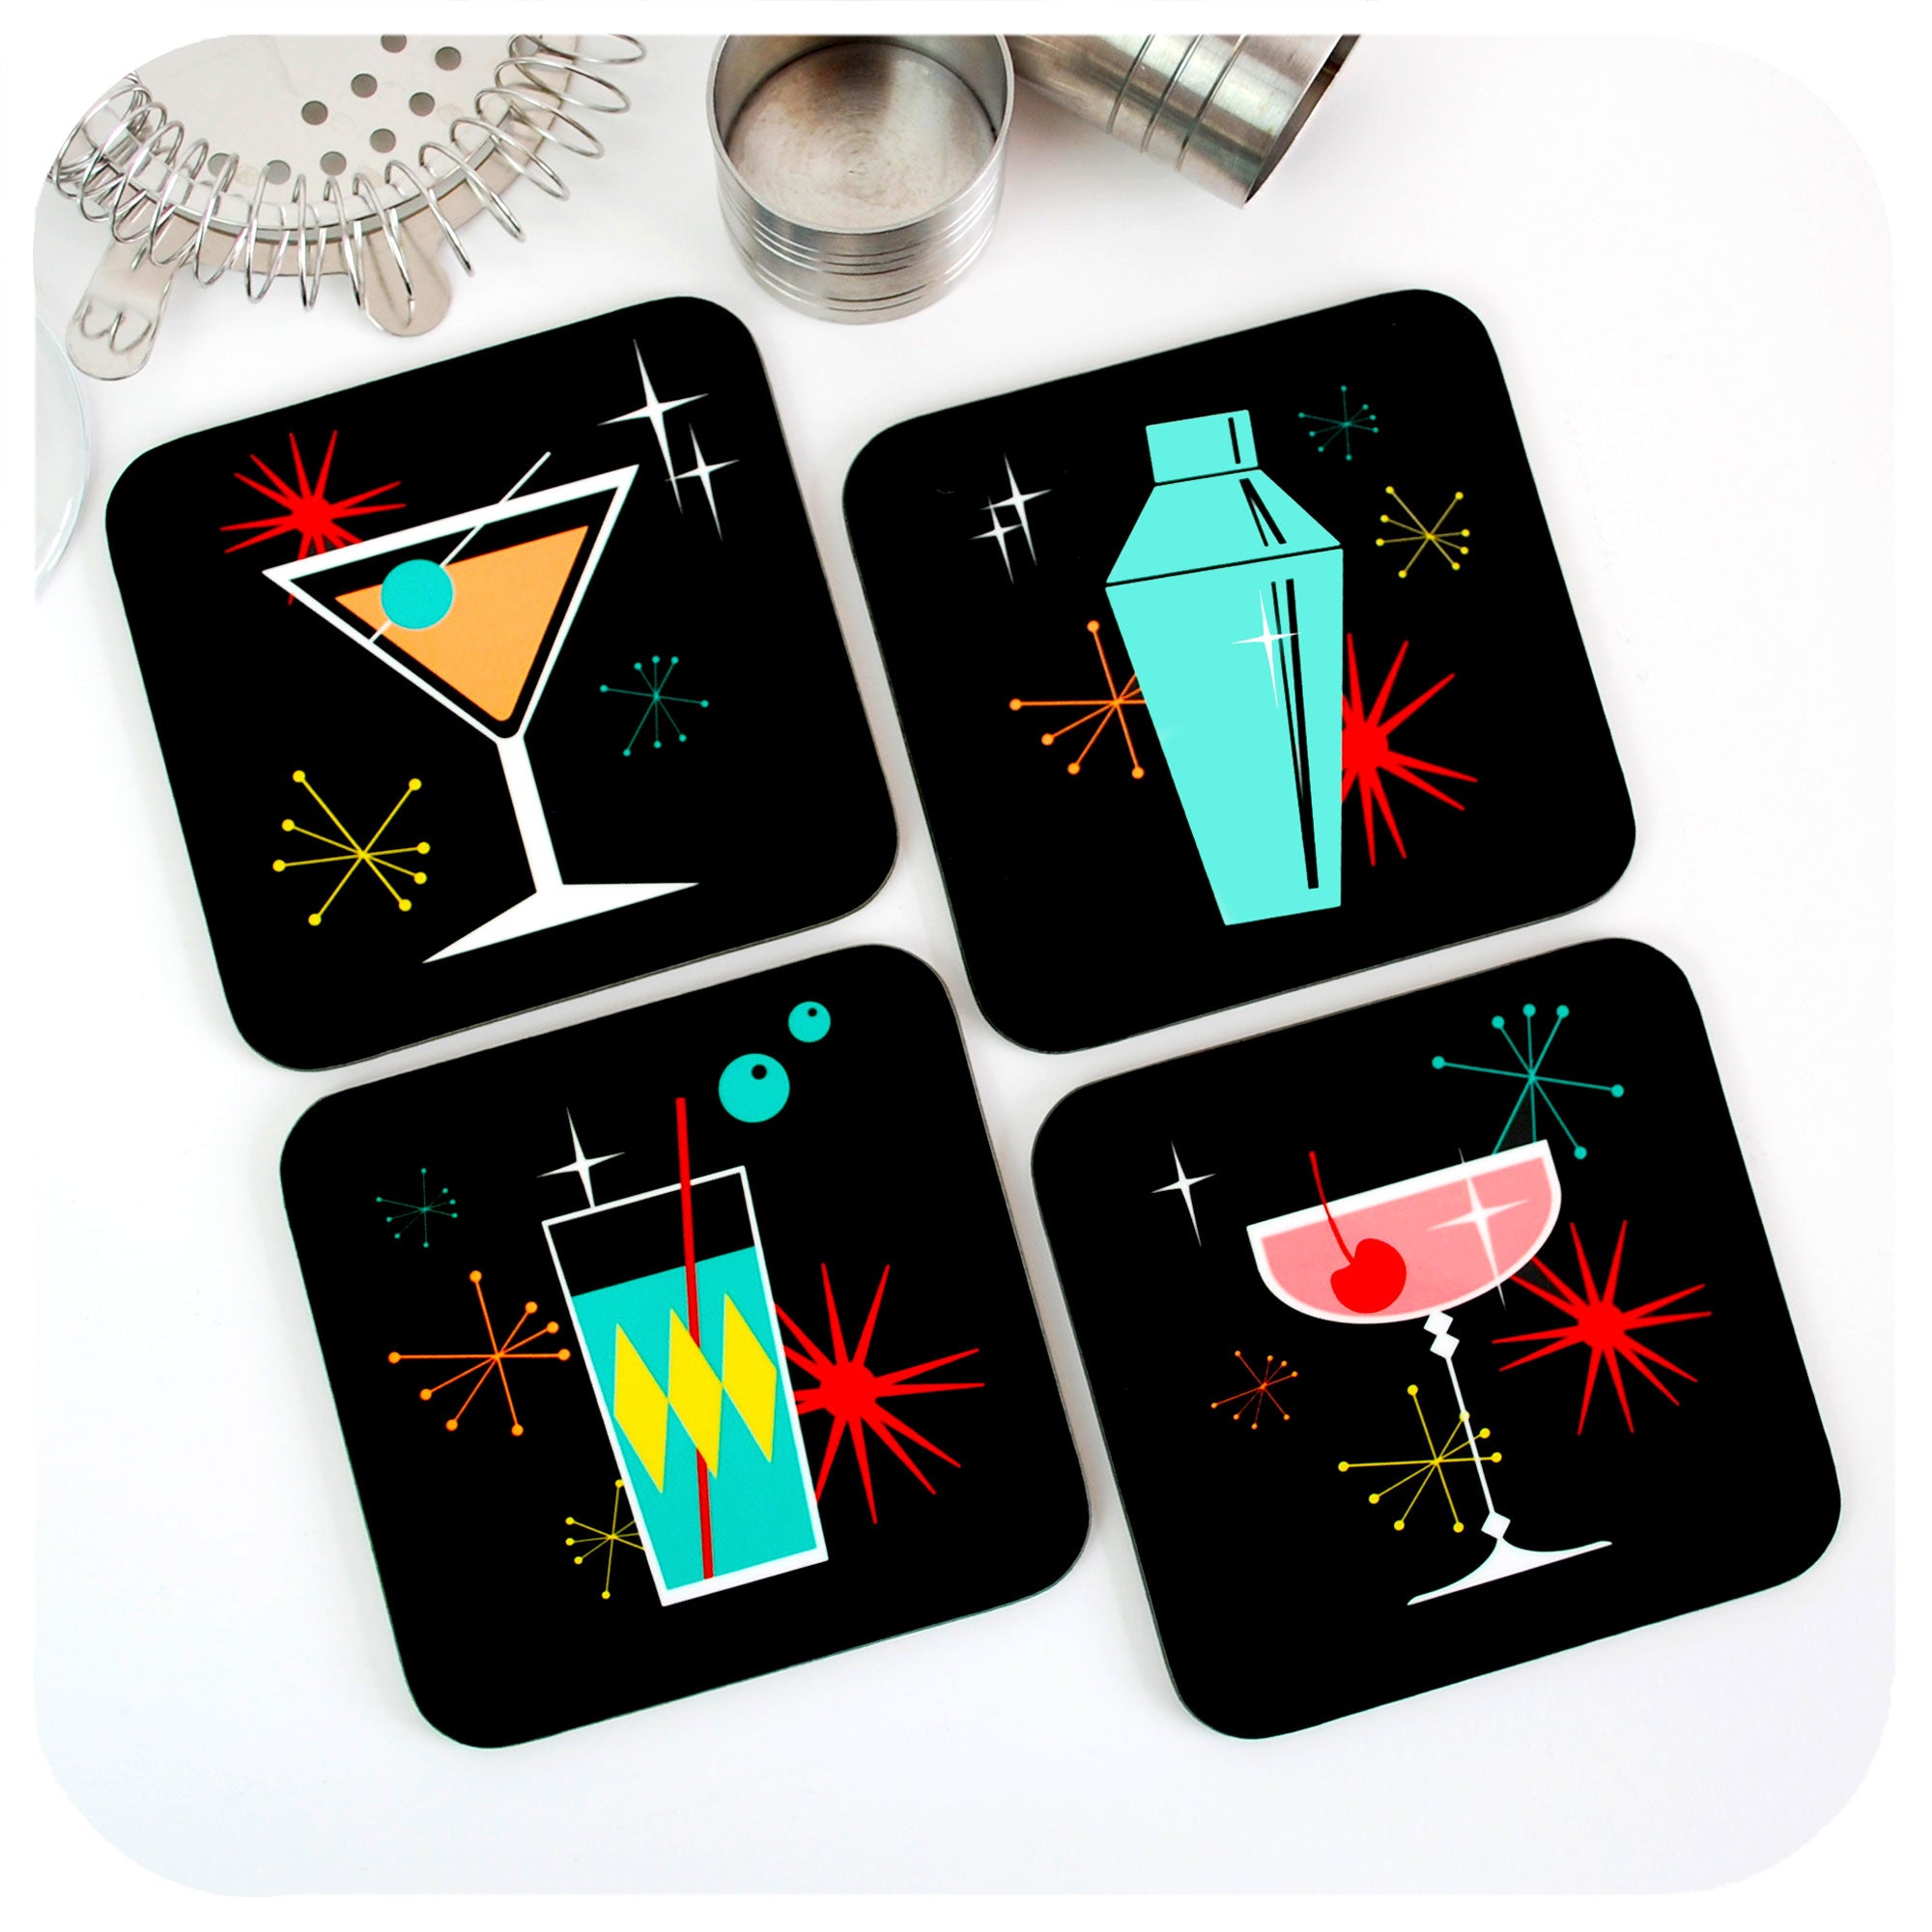 Cosmic Cocktail Coasters - Set of 4, on table with cocktail bar accessories | The Inkabilly Emporium